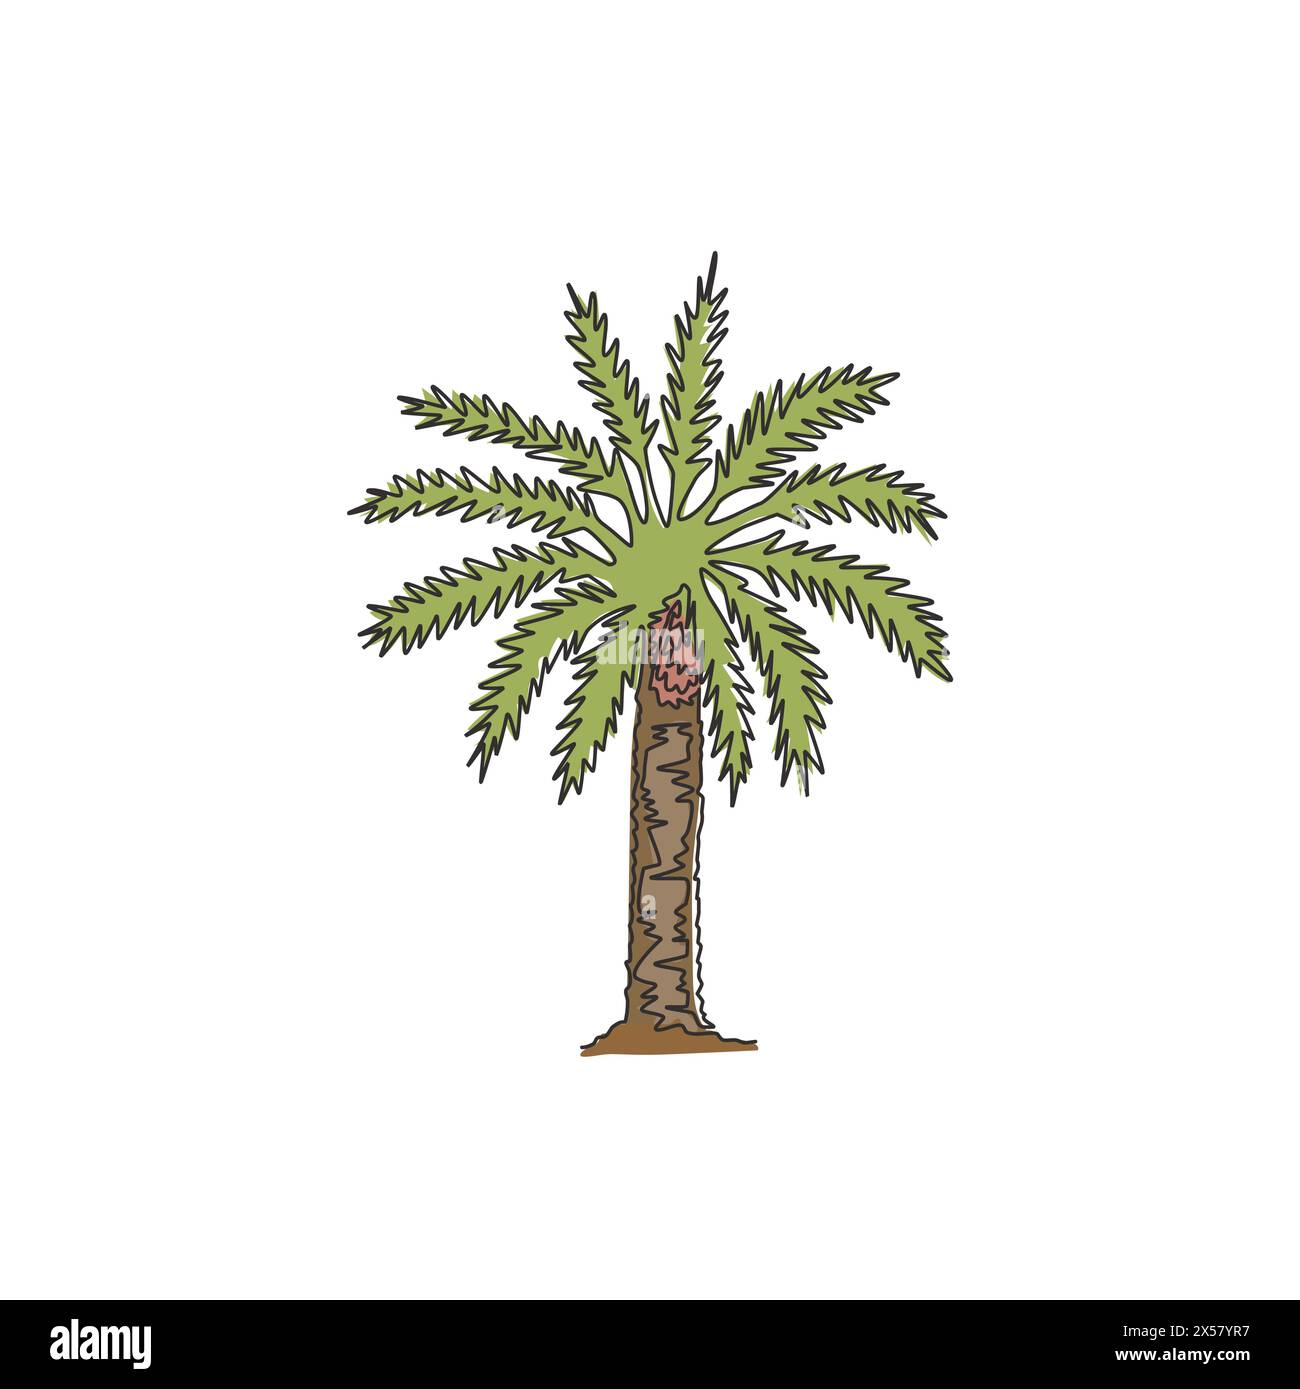 Single continuous line drawing of beauty and big phoenix dactylifera tree. Decorative date palm plant concept for home decor wall art poster print. Mo Stock Vector